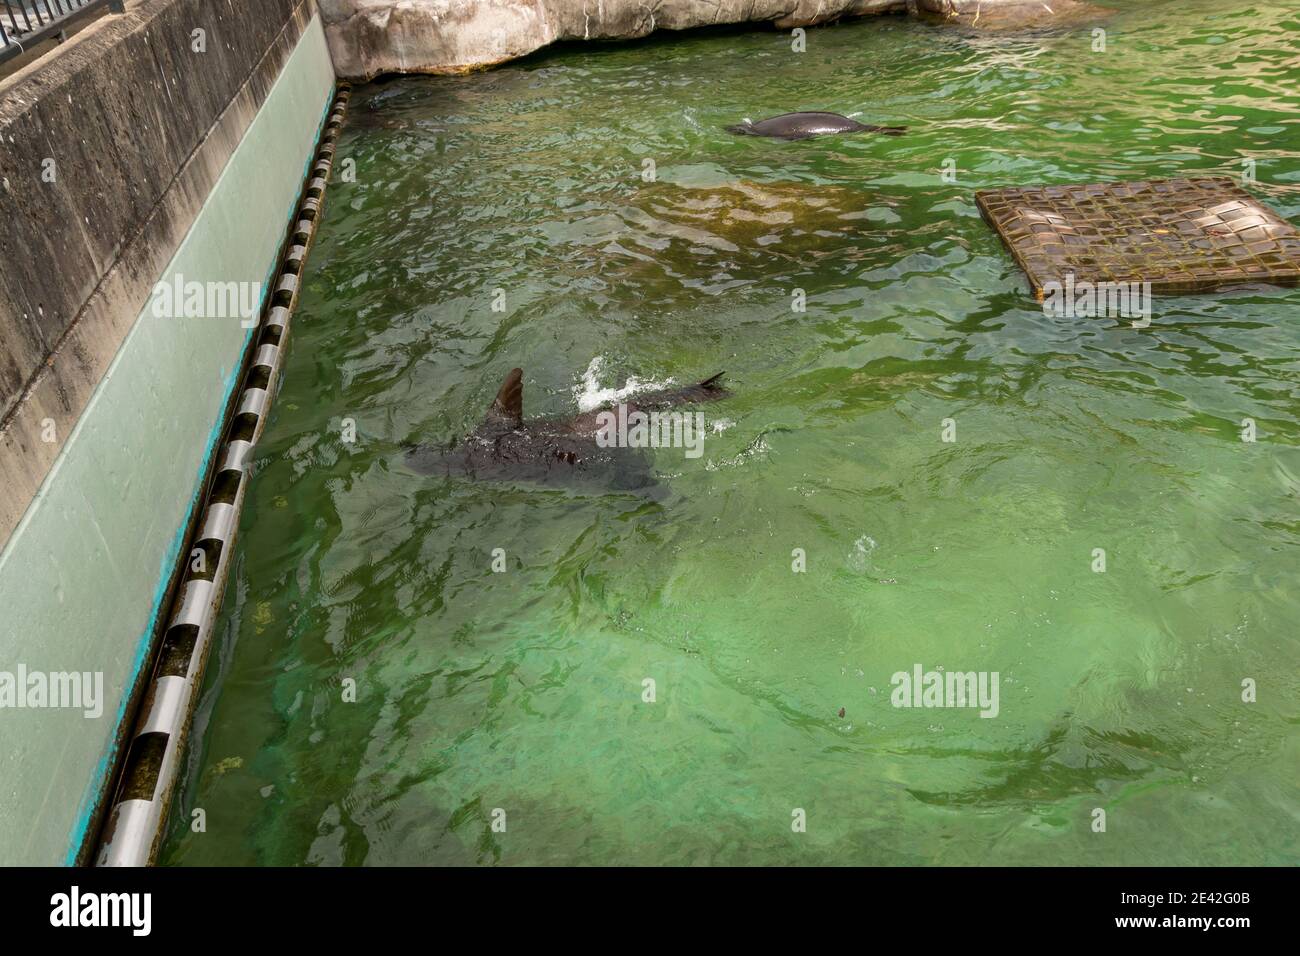 Aalborg, Denmark - 25 Jul 2020: Seals play and swim around on a lovely day, green water and rocks Stock Photo